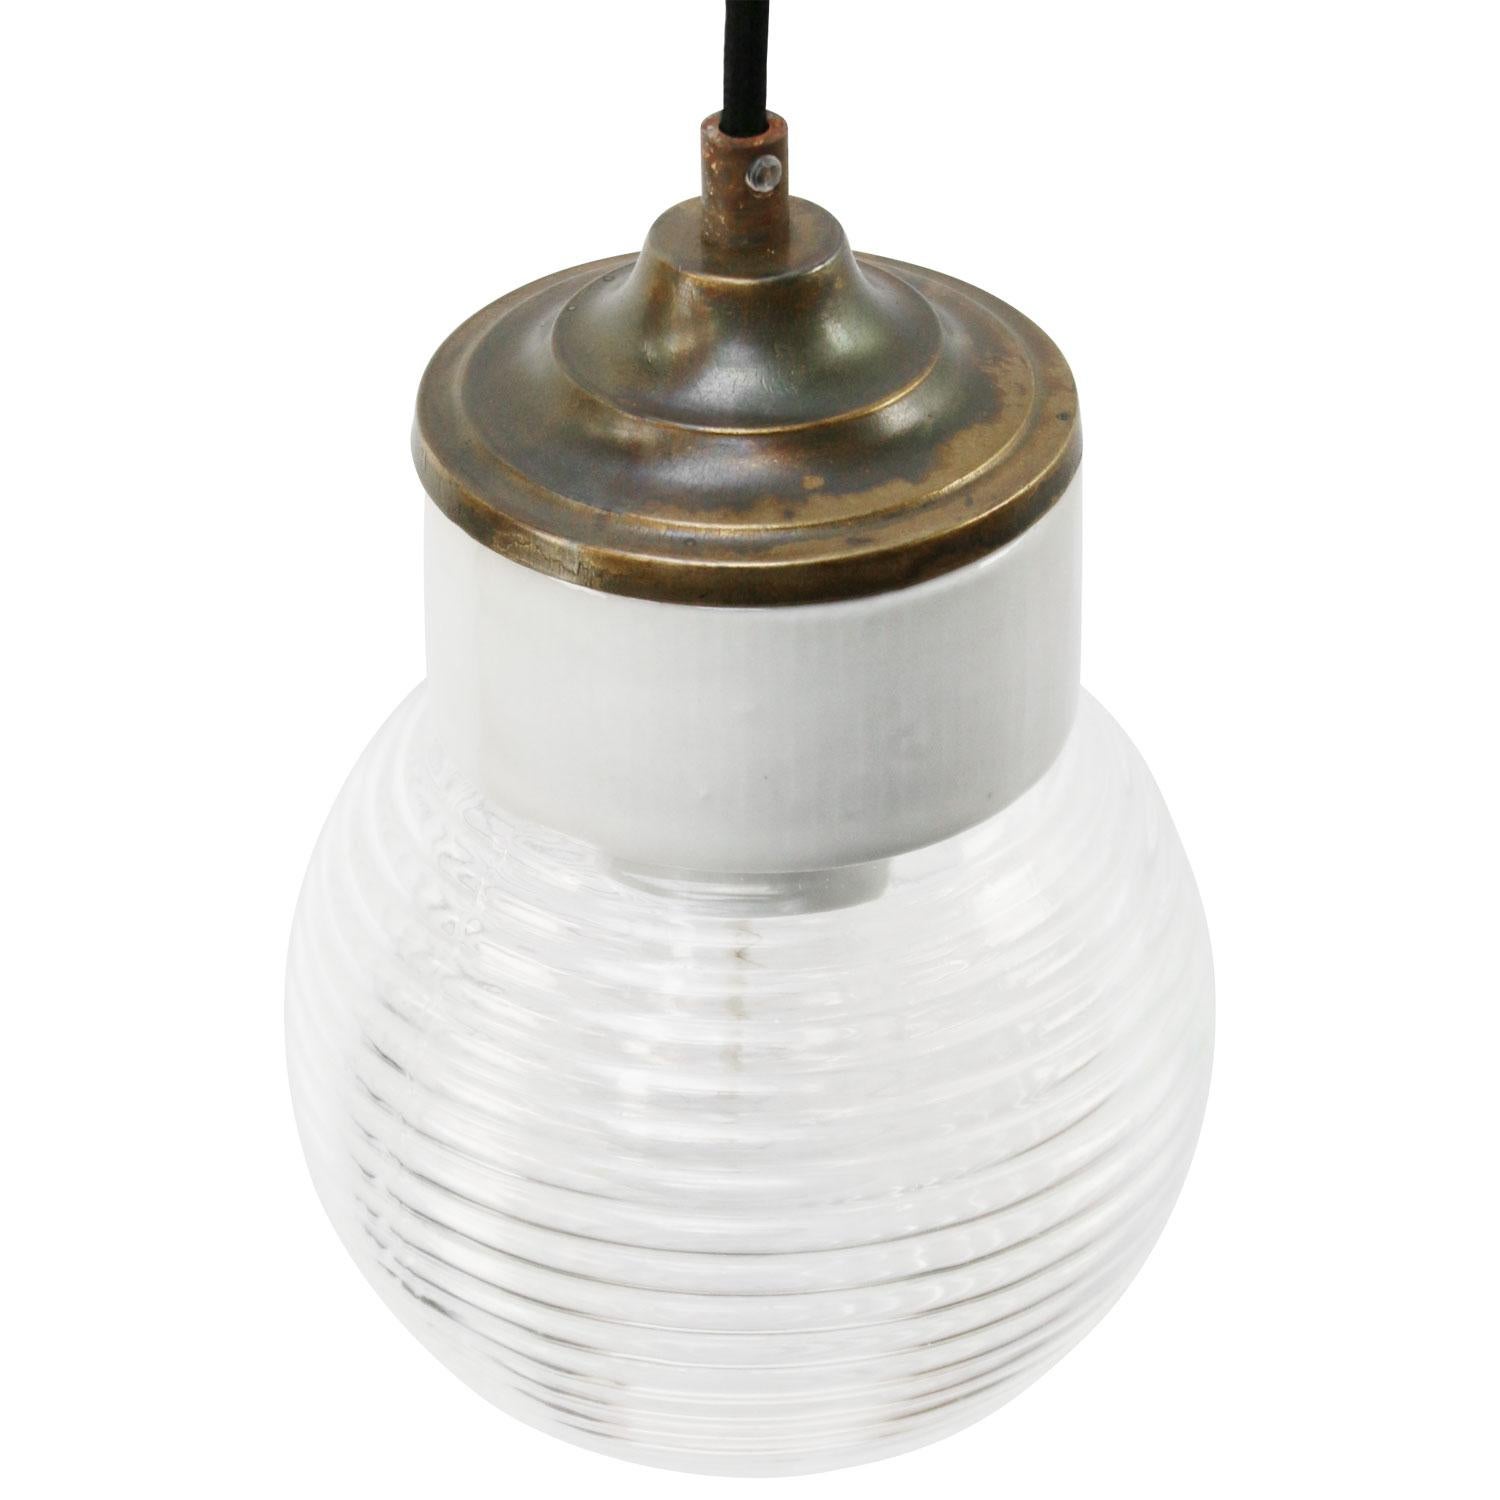 Porcelain industrial hanging lamp.
White porcelain, brass and clear striped glass.
2 conductors, no ground.

Weight: 1.20 kg / 2.6 lb

Priced per individual item. All lamps have been made suitable by international standards for incandescent light